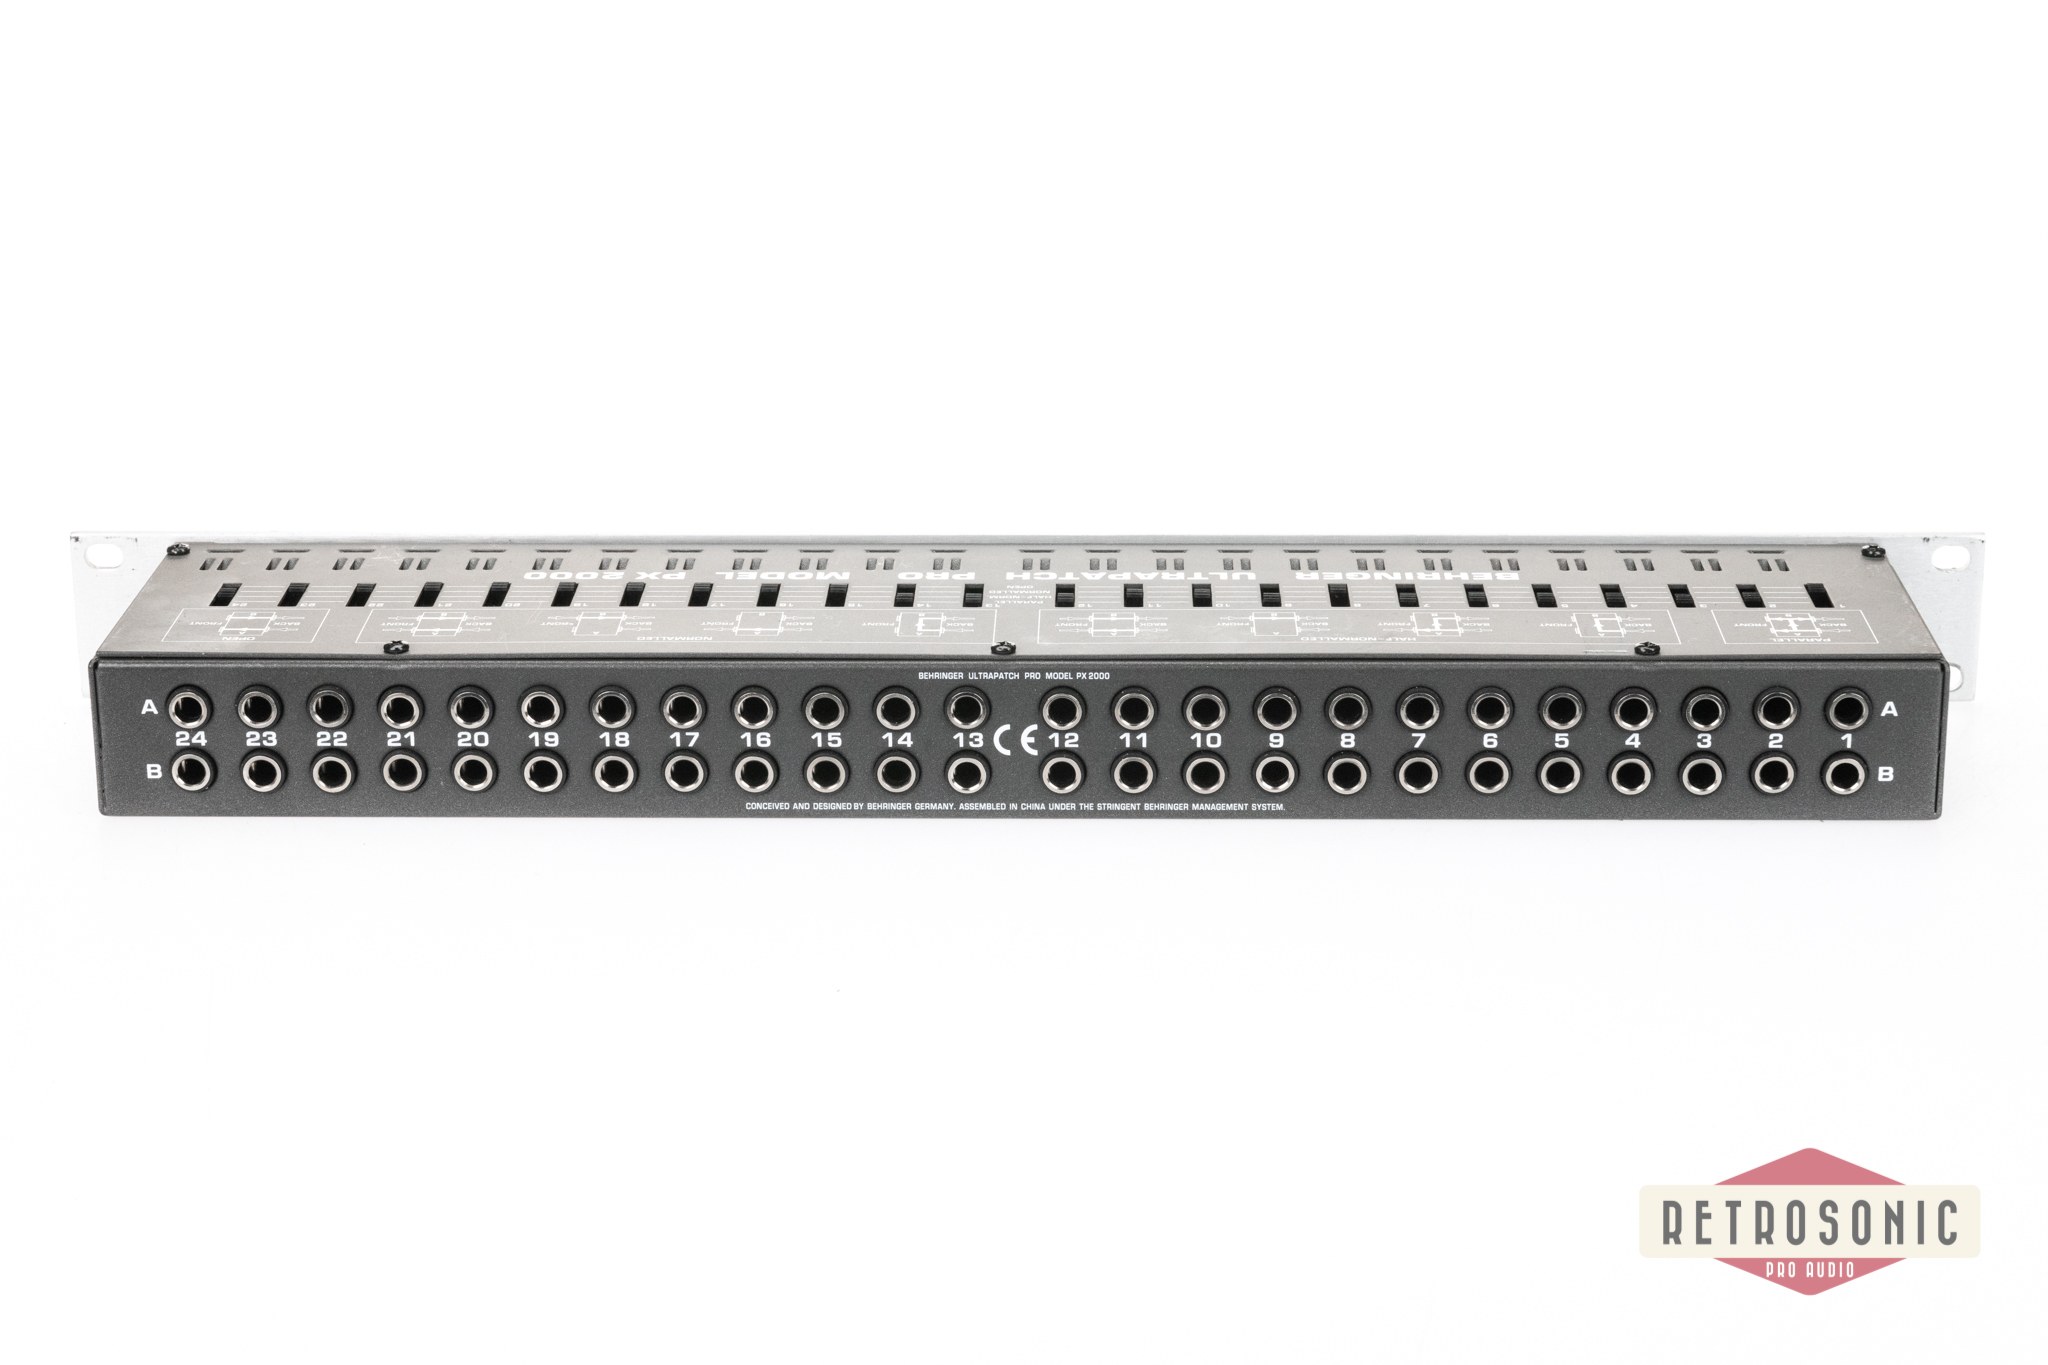 Behringer PX2000 Ultrapatch pro 48-point patchbay #1